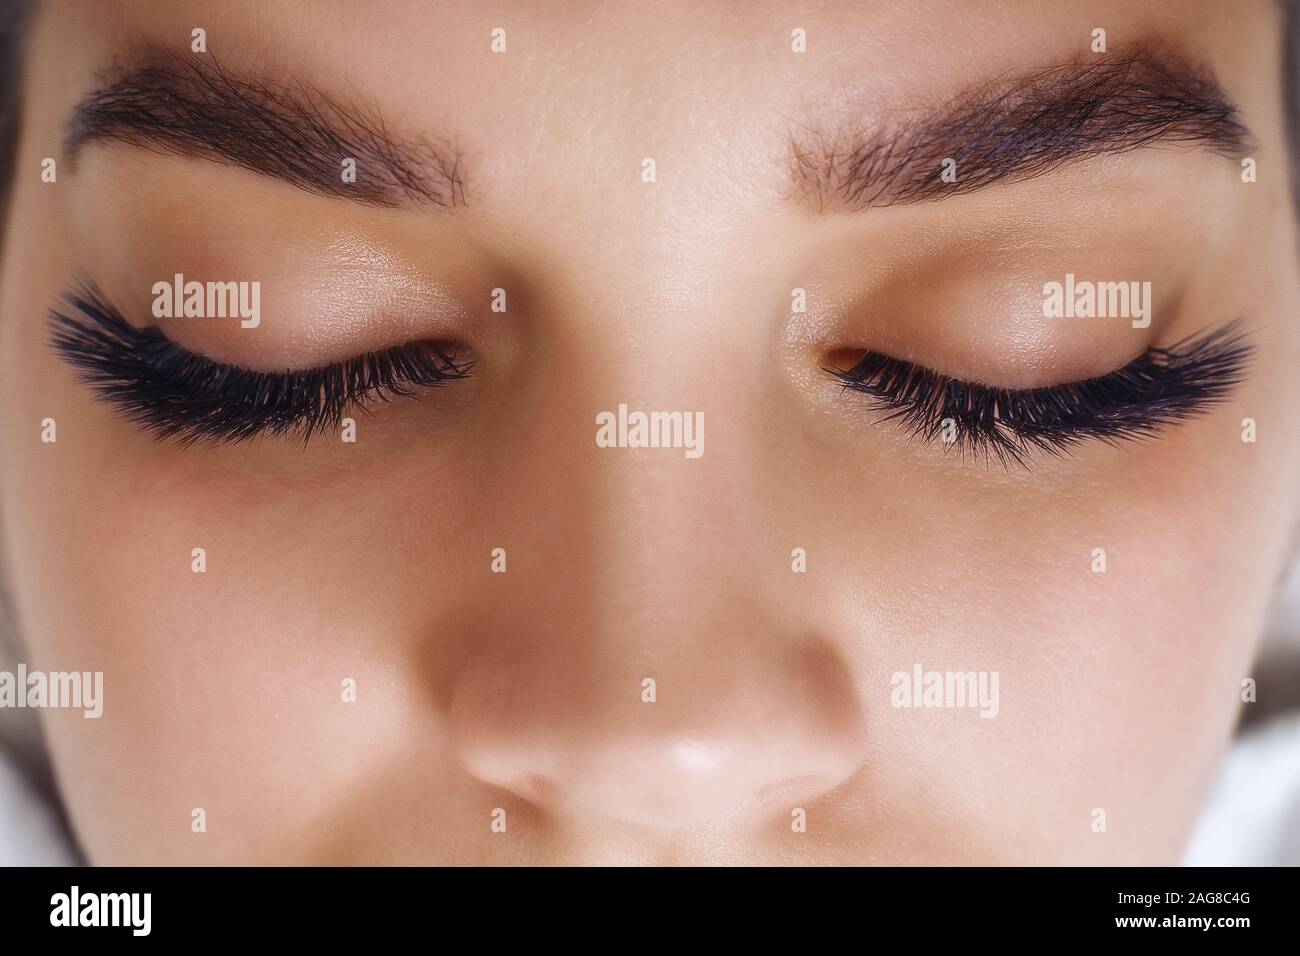 Eyelash Extension Procedure. Woman Eye with Long Blue Eyelashes. Ombre effect. Close up, selective focus. Stock Photo